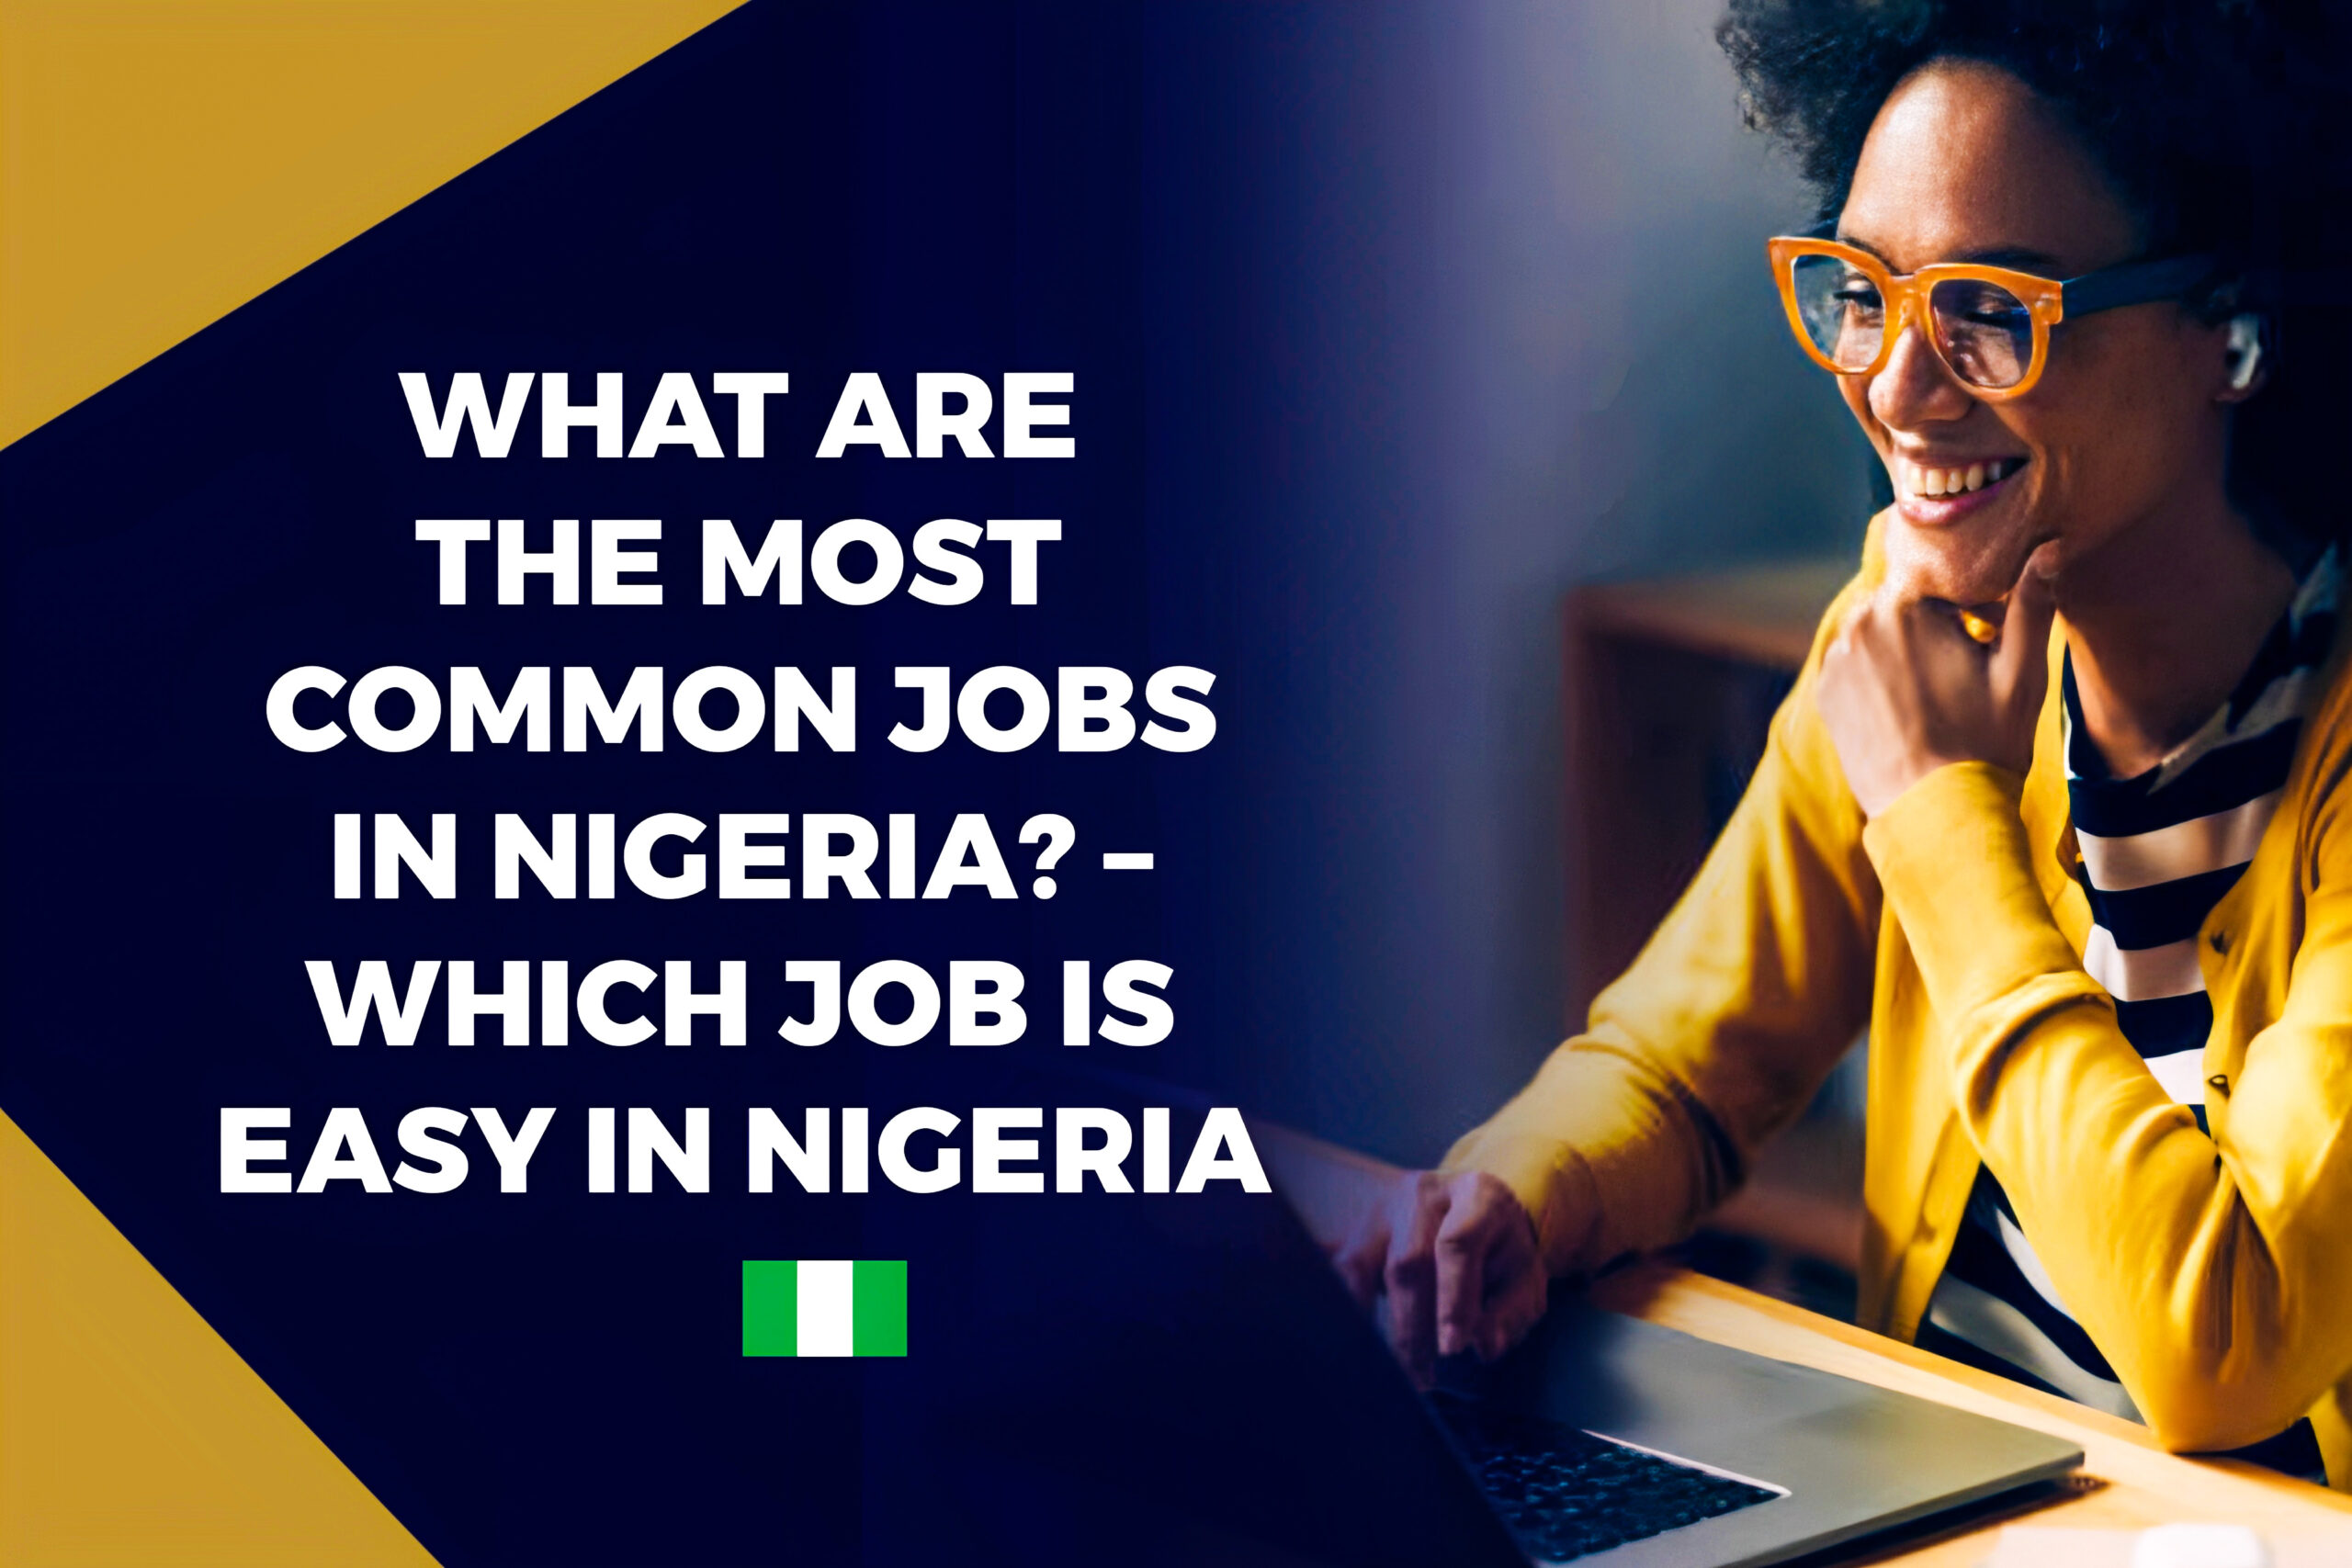 What Are The Most Common Jobs In Nigeria? – Which Job Is Easy In Nigeria